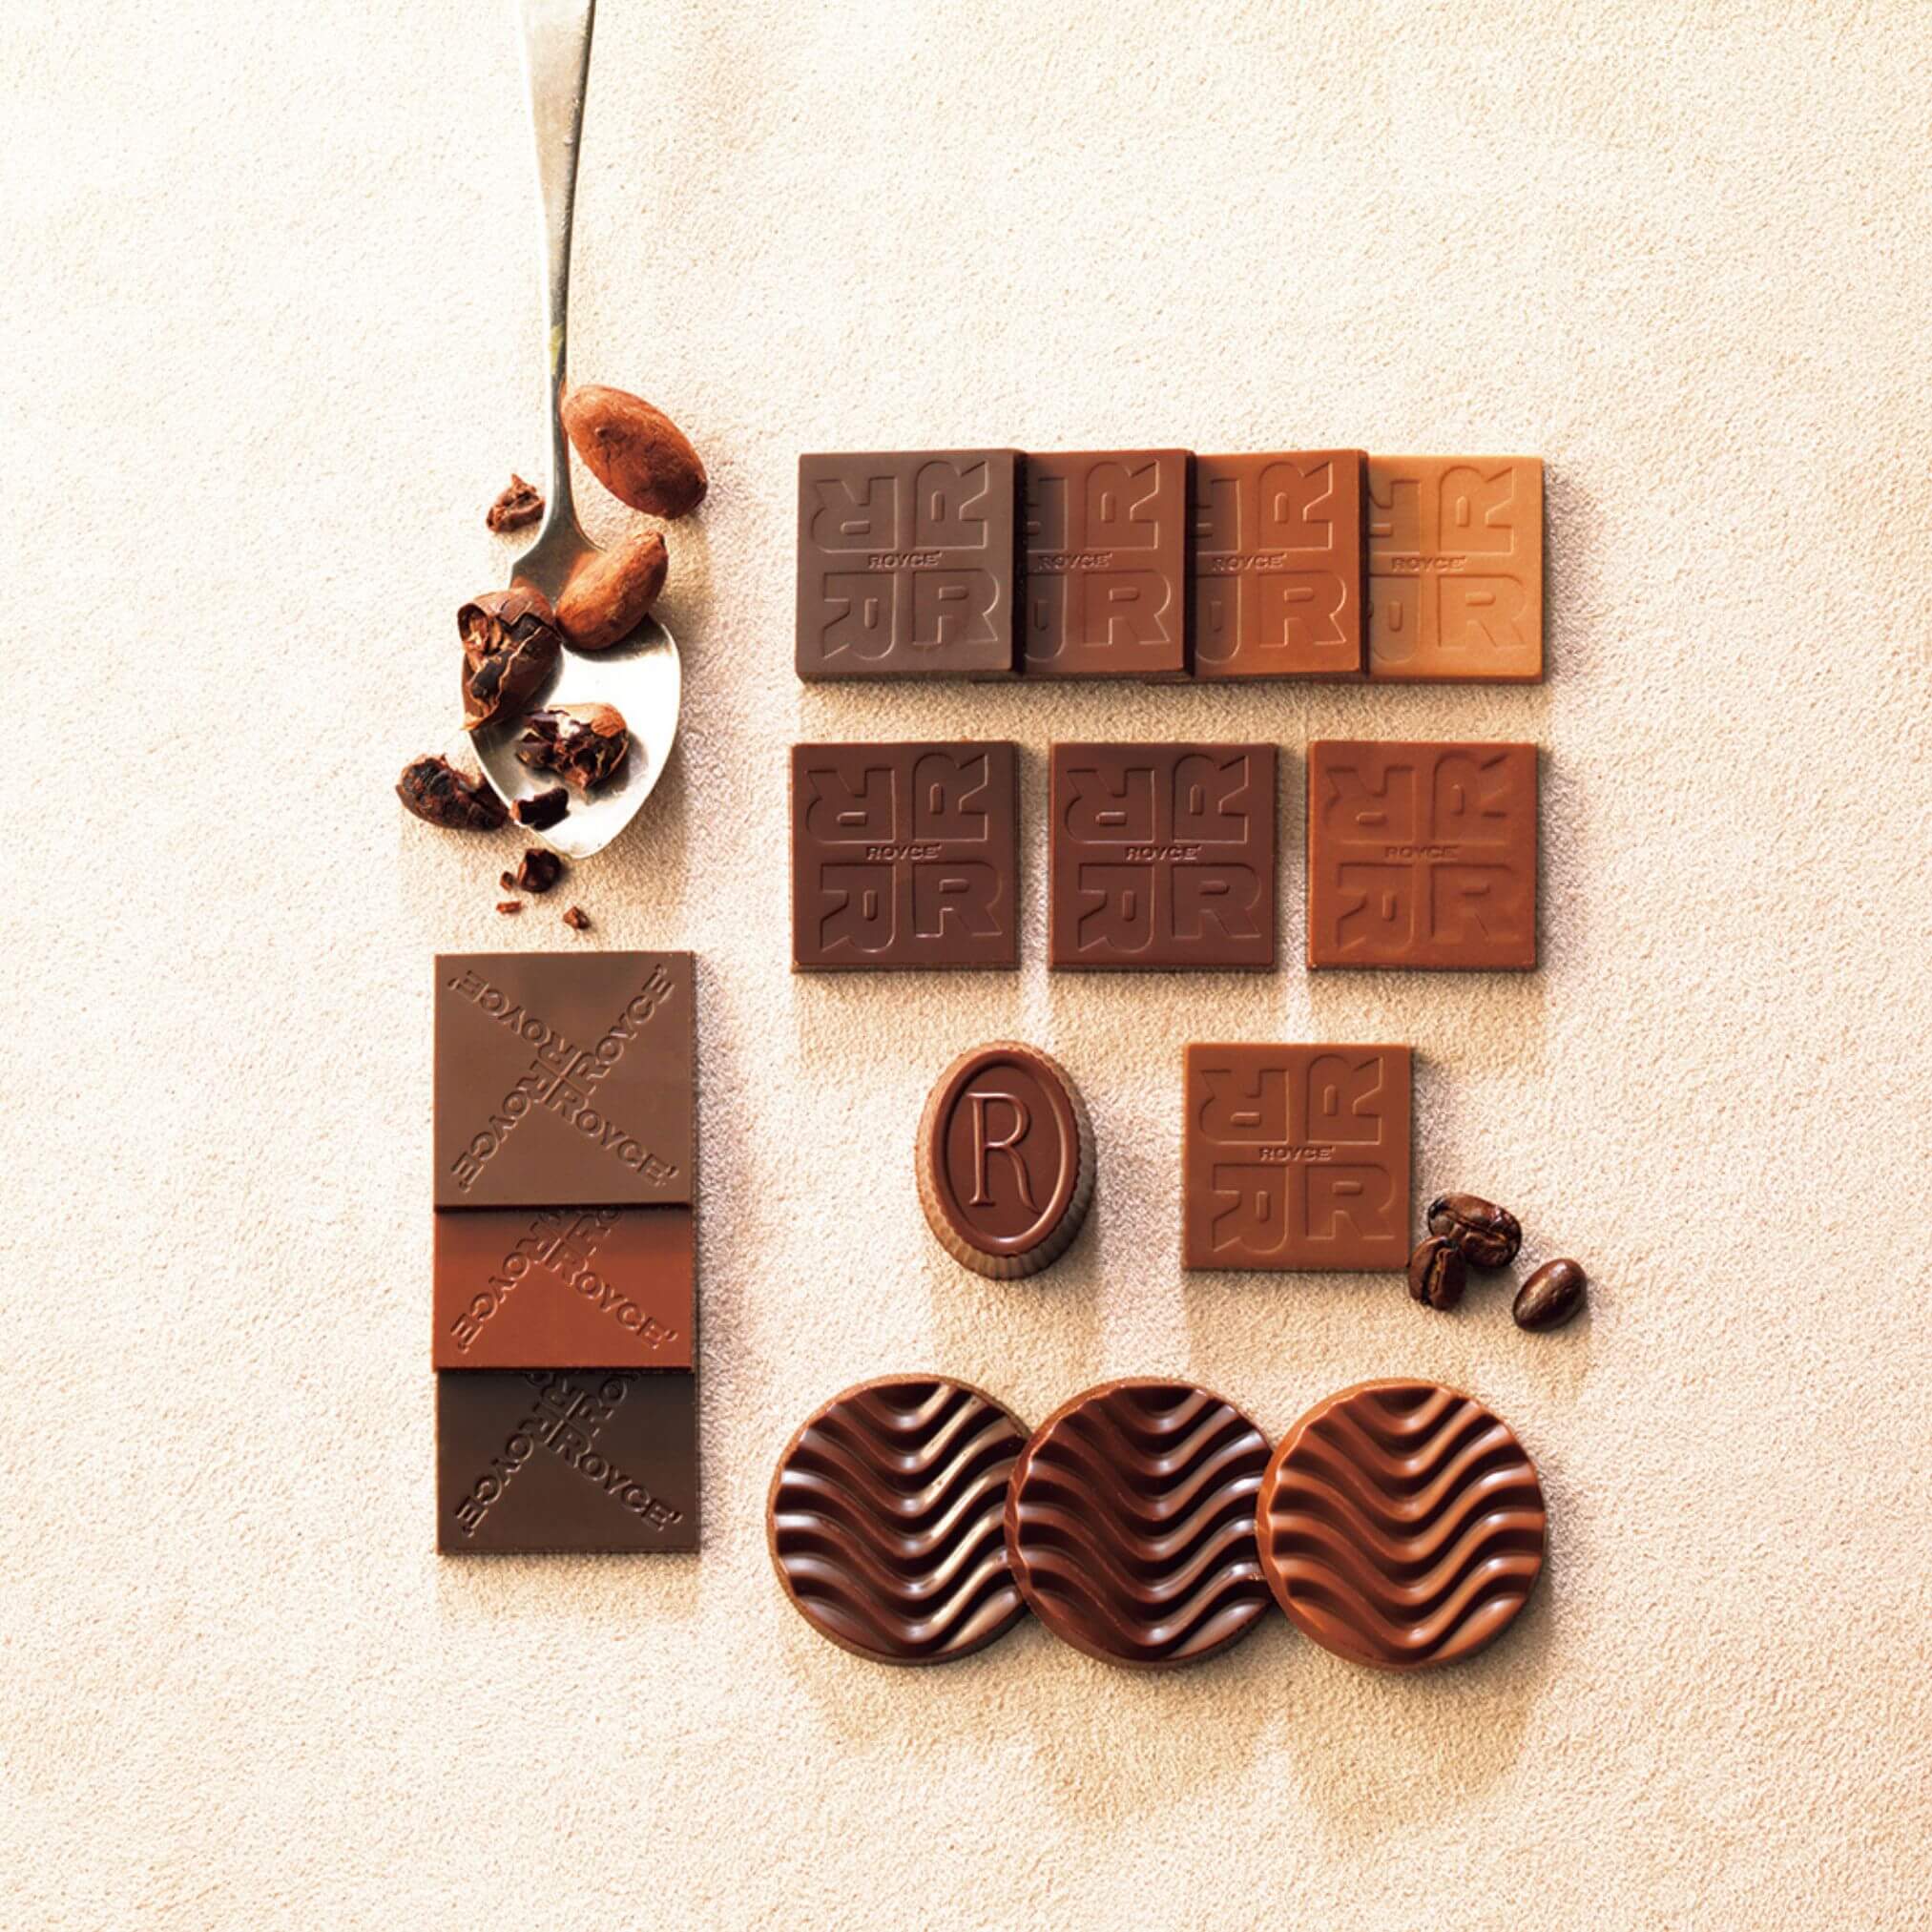 ROYCE' Chocolate - ROYCE' Tasting Box - Image shows brown chocolates in different shapes and sizes with a light brown background. Accents include a silver spoon and some loose cacao beans.